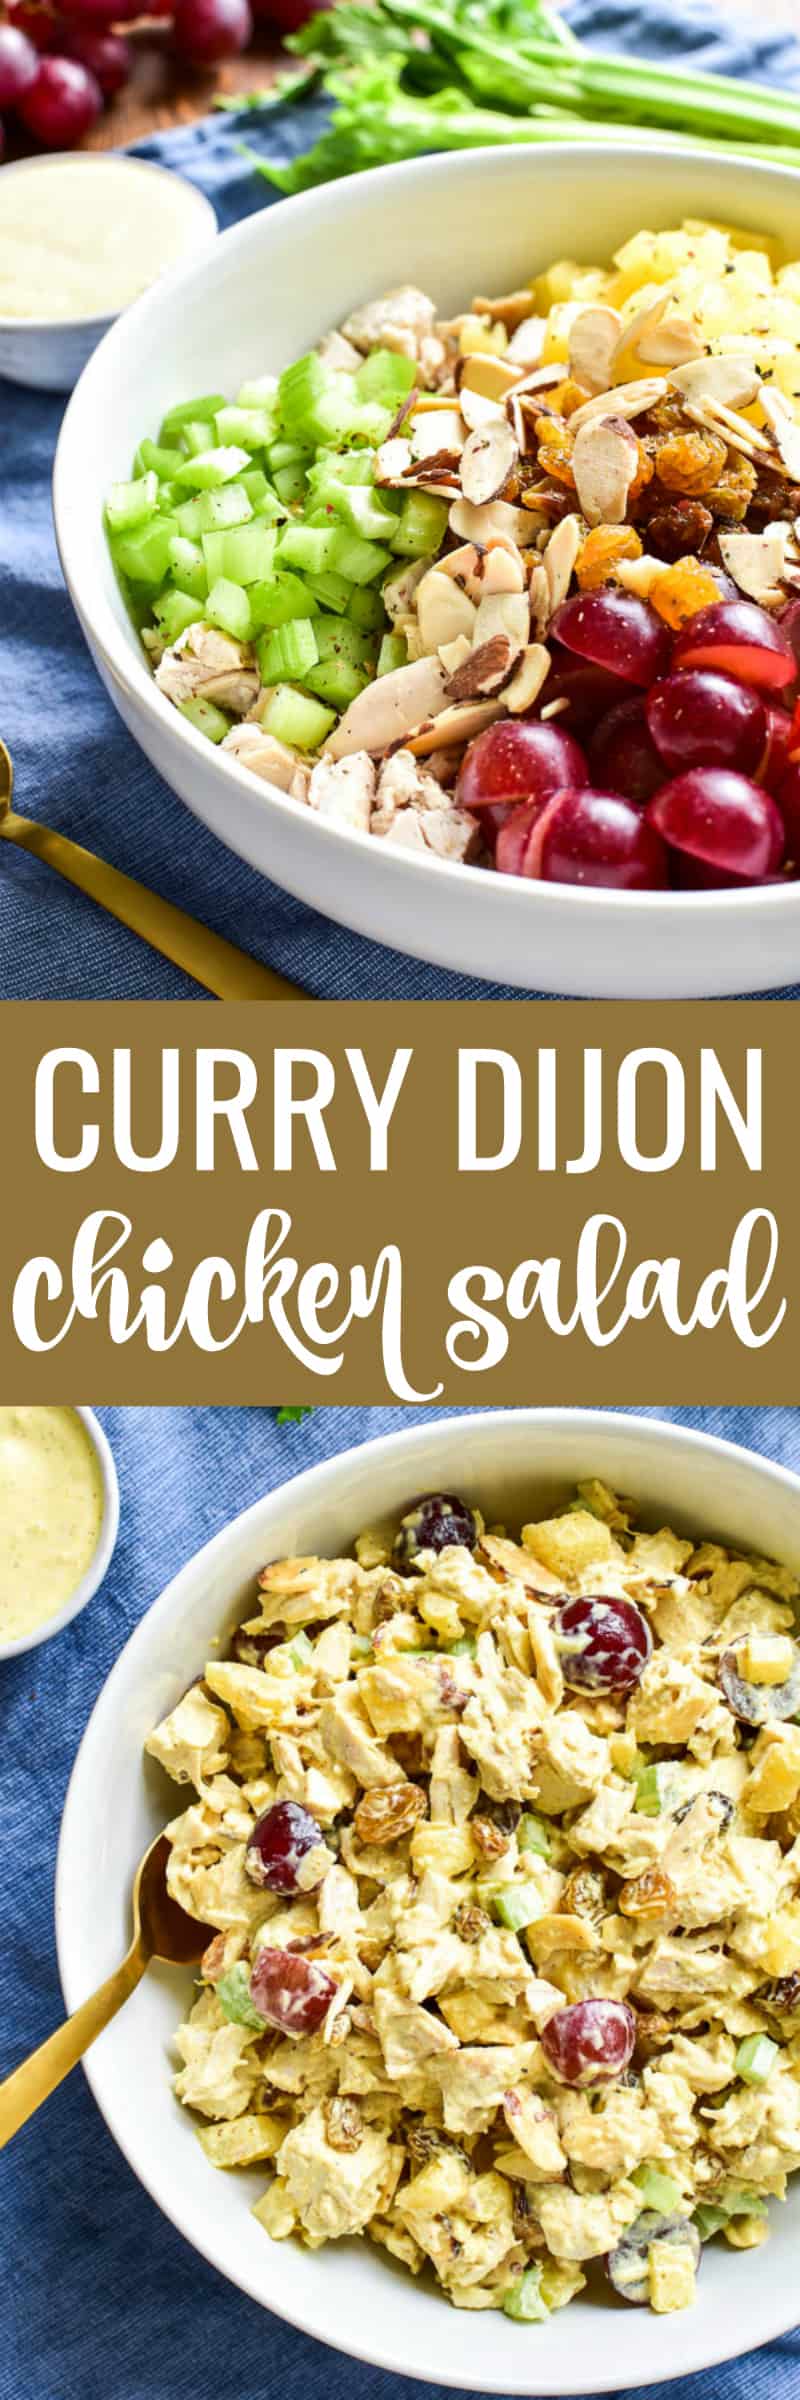 Collage image of Curry Dijon Chicken Salad